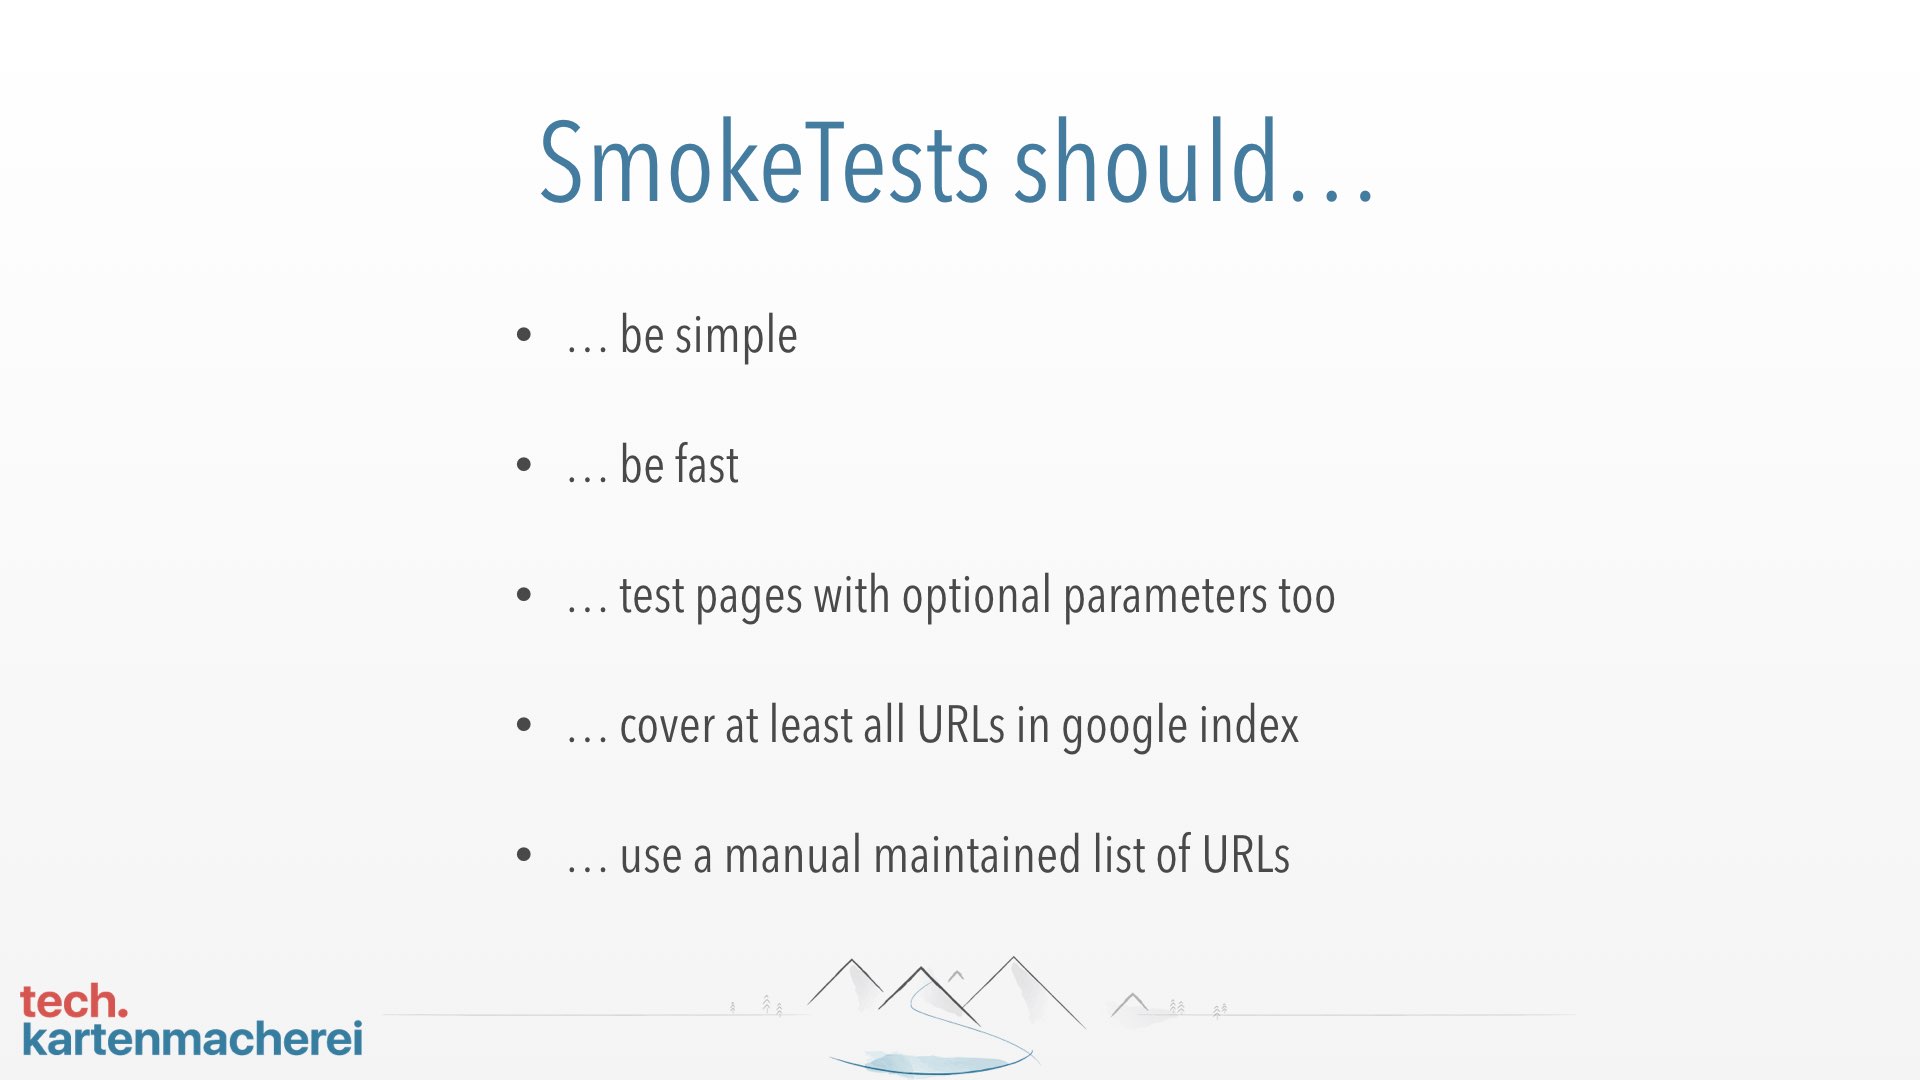 With this slide Sebastian Thoss explains what SmokeTests doing